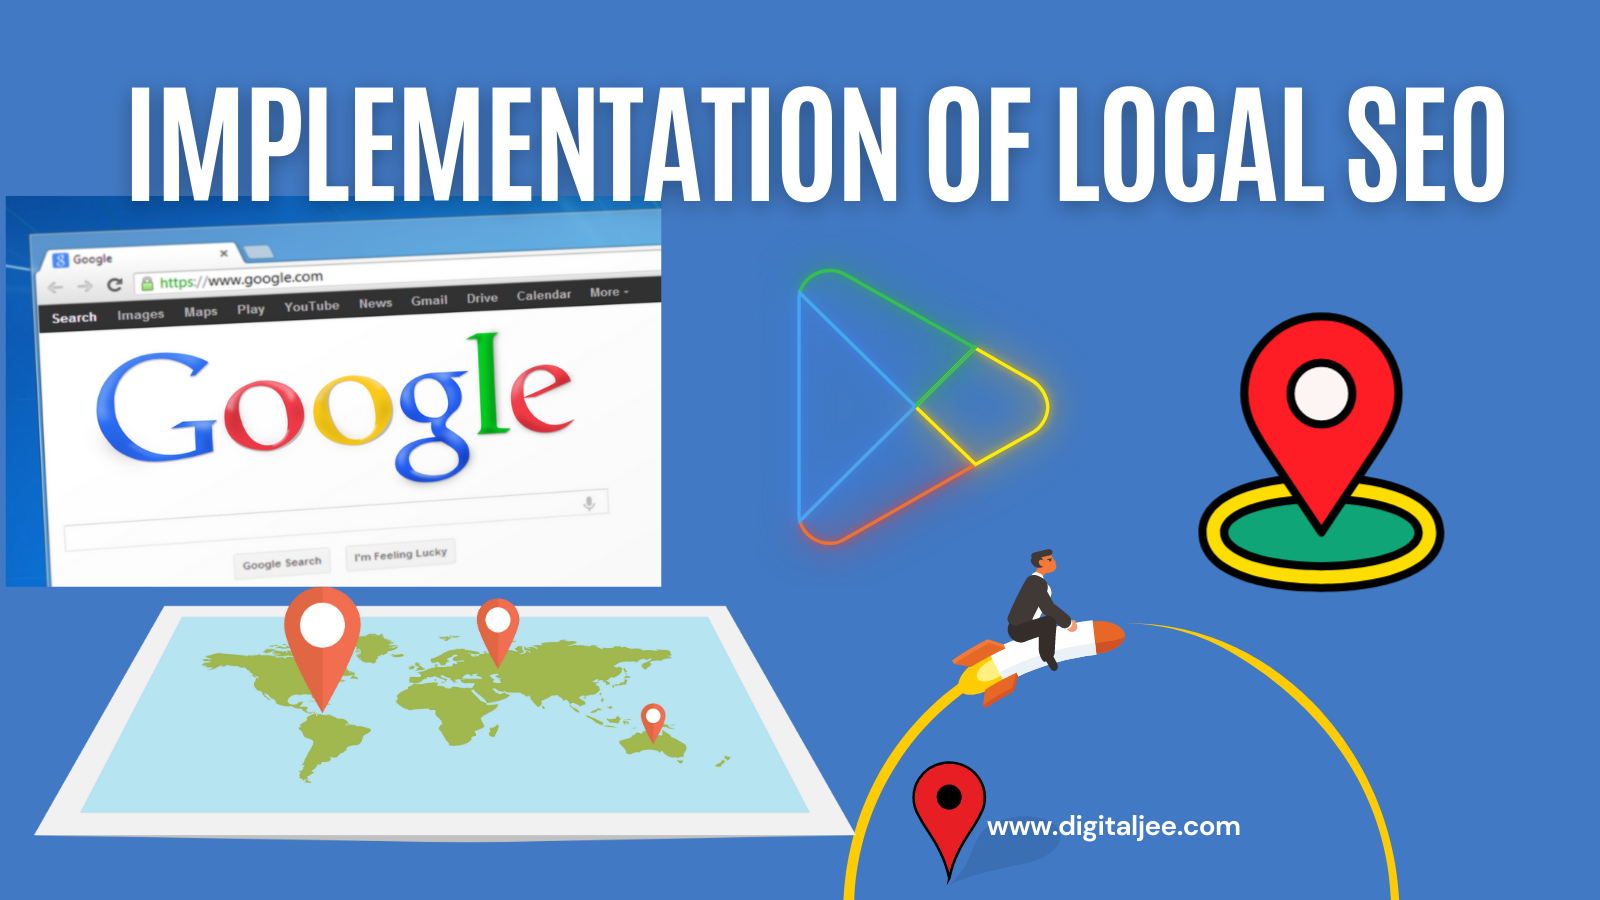 Implementing Local SEO Practice